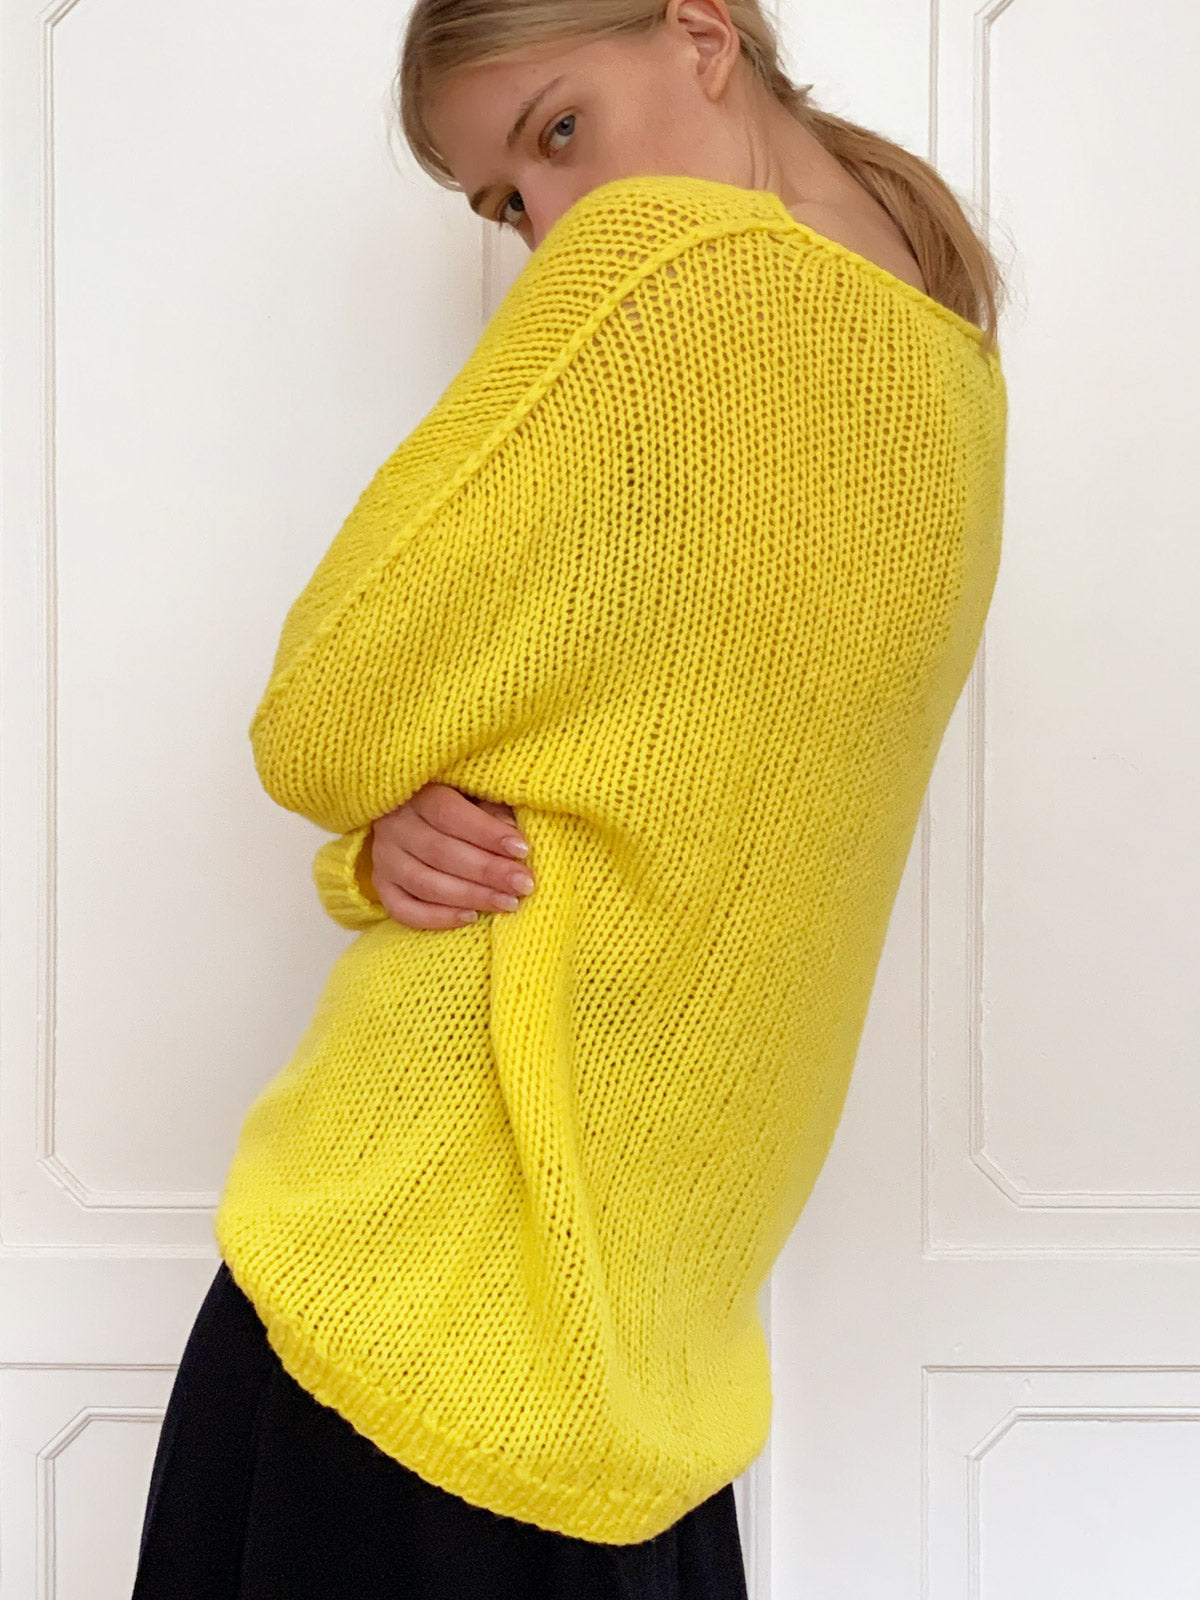 Wommelsdorff Sunny Cashmere Pullover